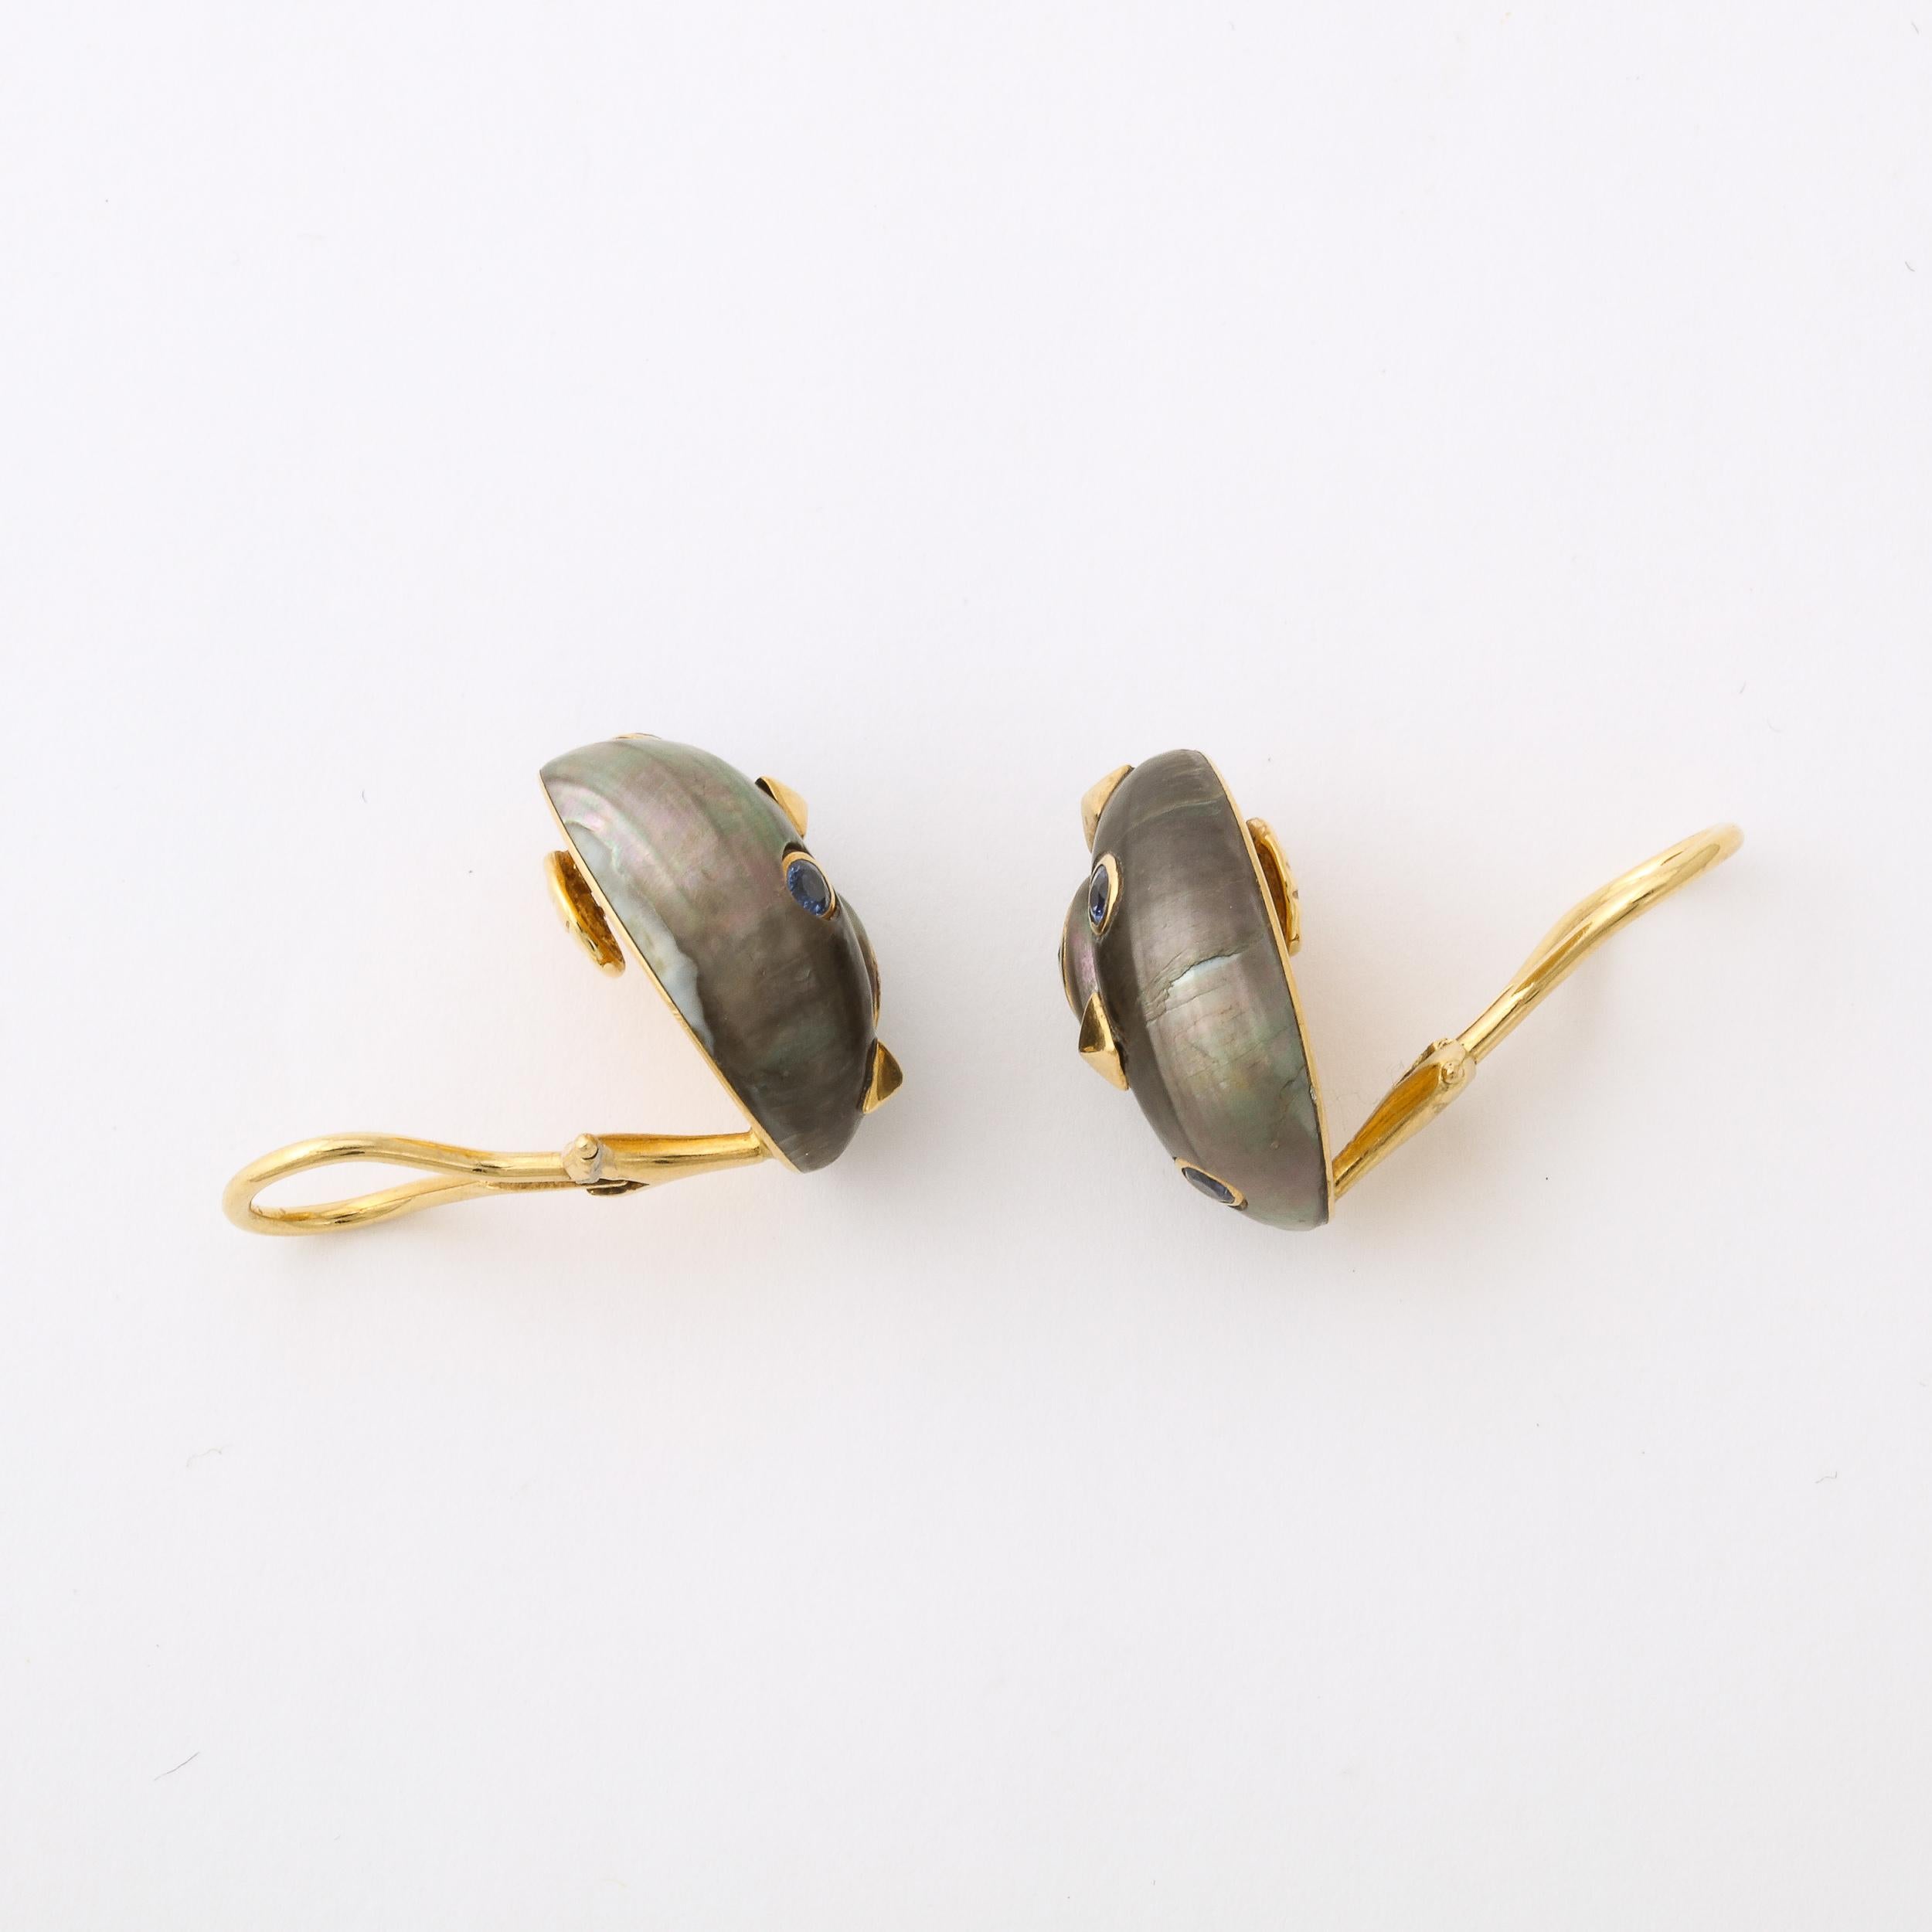 Round Cut Iridescent Grey Shell Earrings Set in 18k Gold & Inlaid Blue Topaz by Trianon